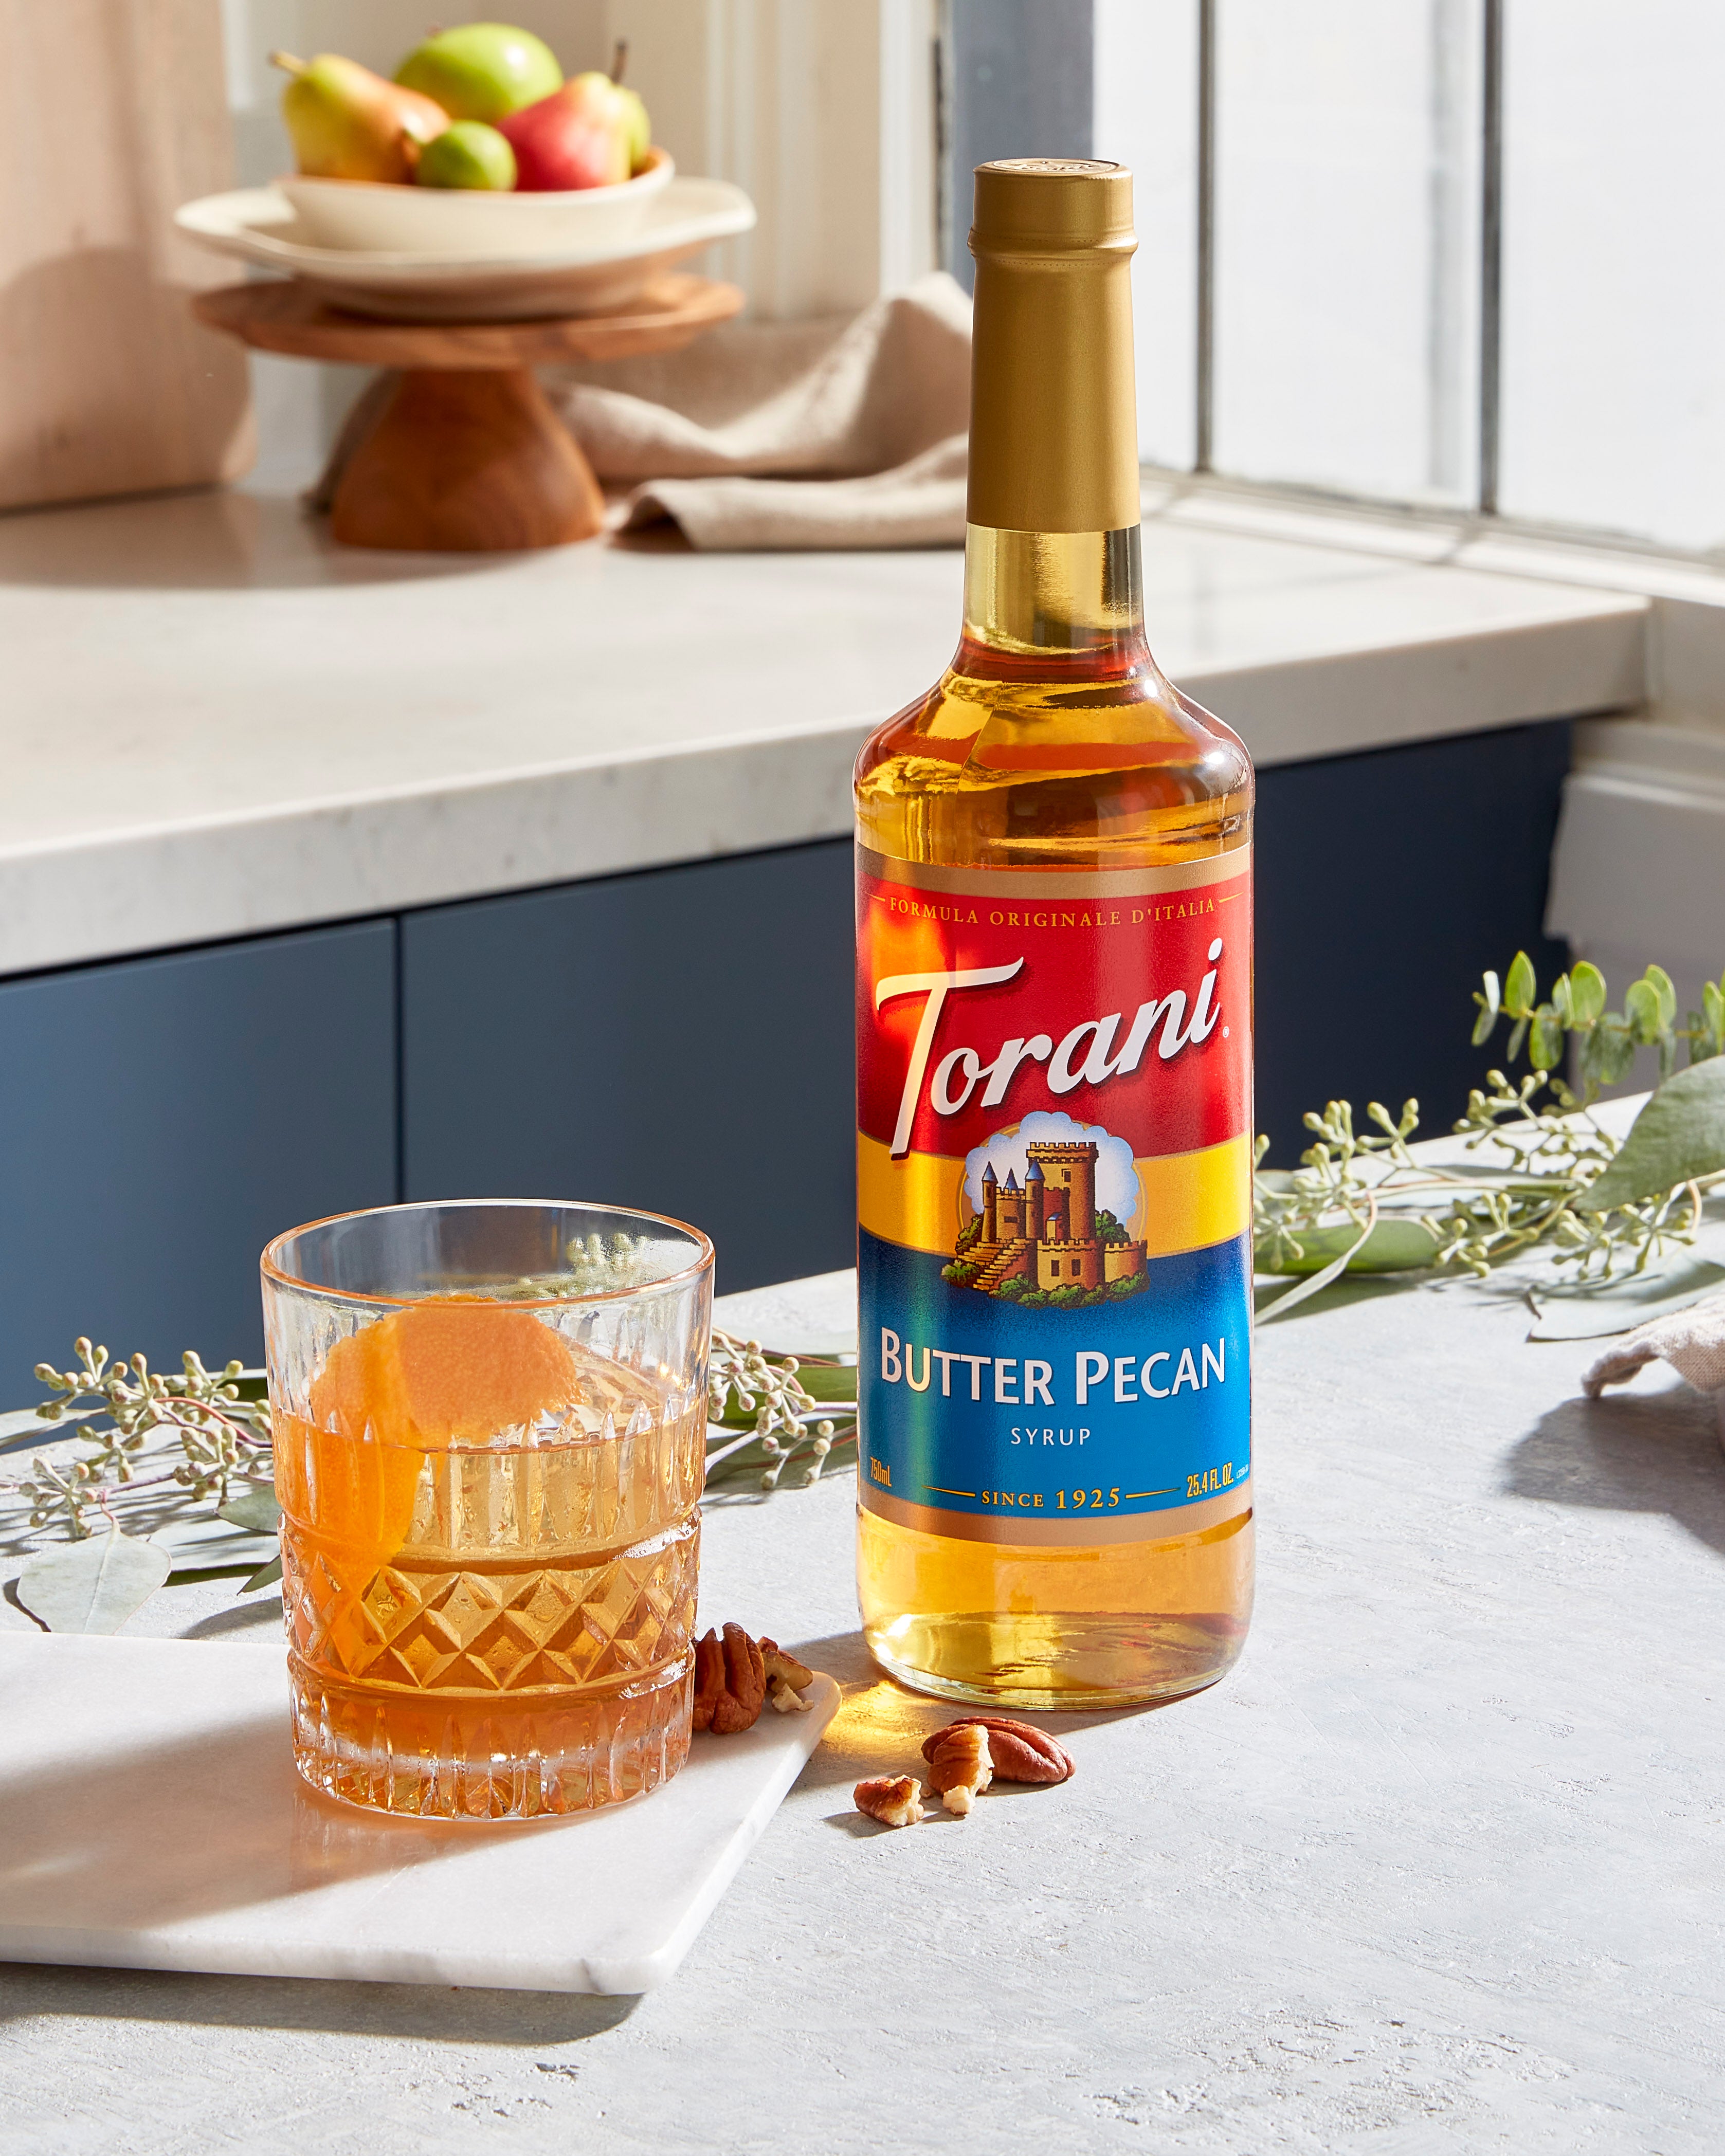 Torani Classic Flavored Syrups - 750 ml Glass Bottle: Butter Pecan